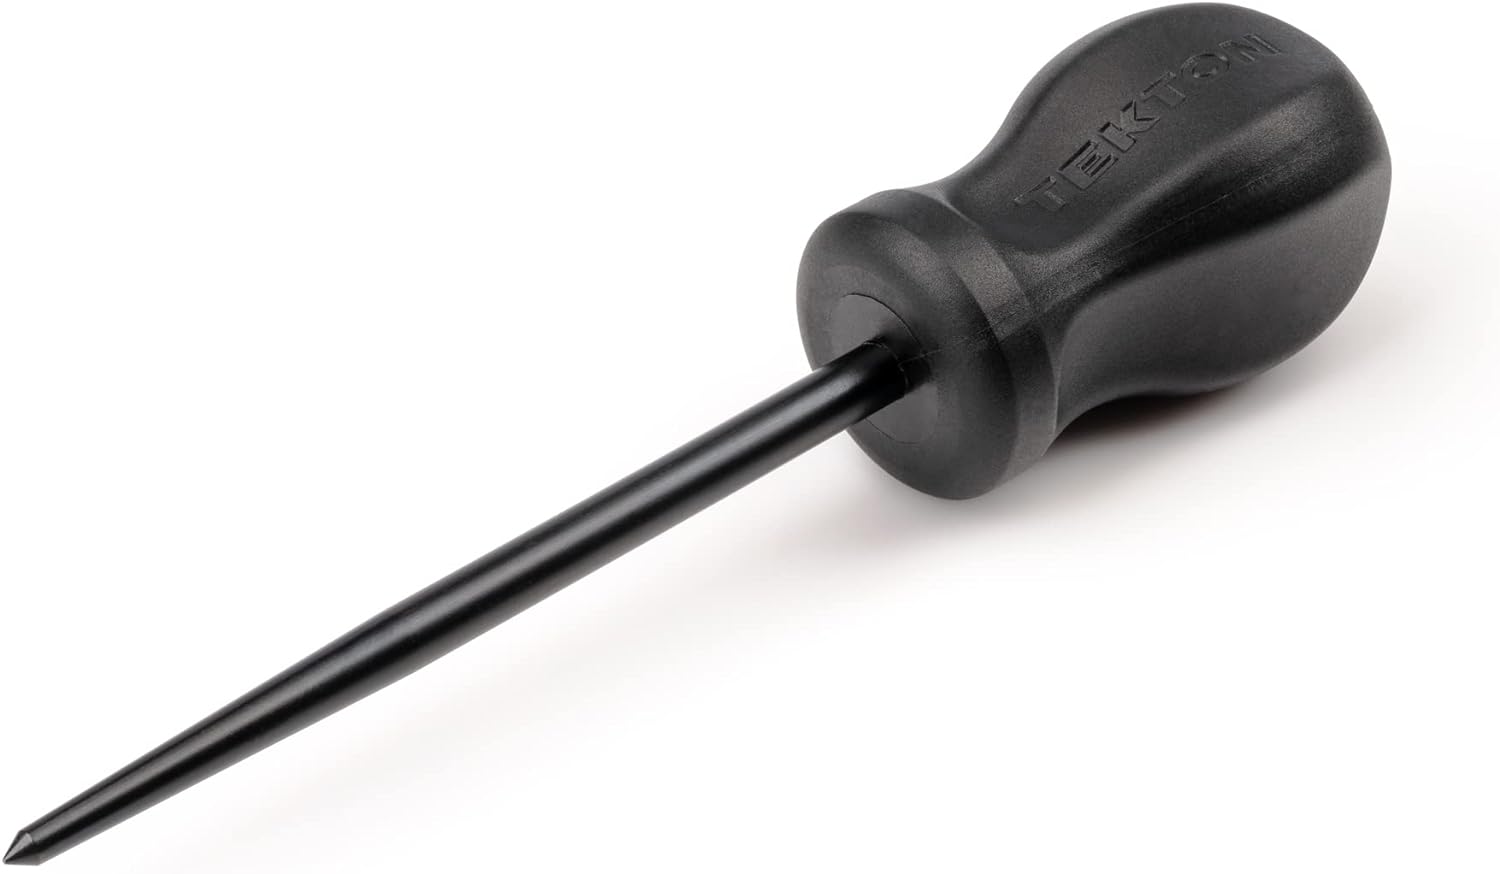 TEKTON Scratch and Punch Awl with Hard Handle | Made in USA | PNH21106